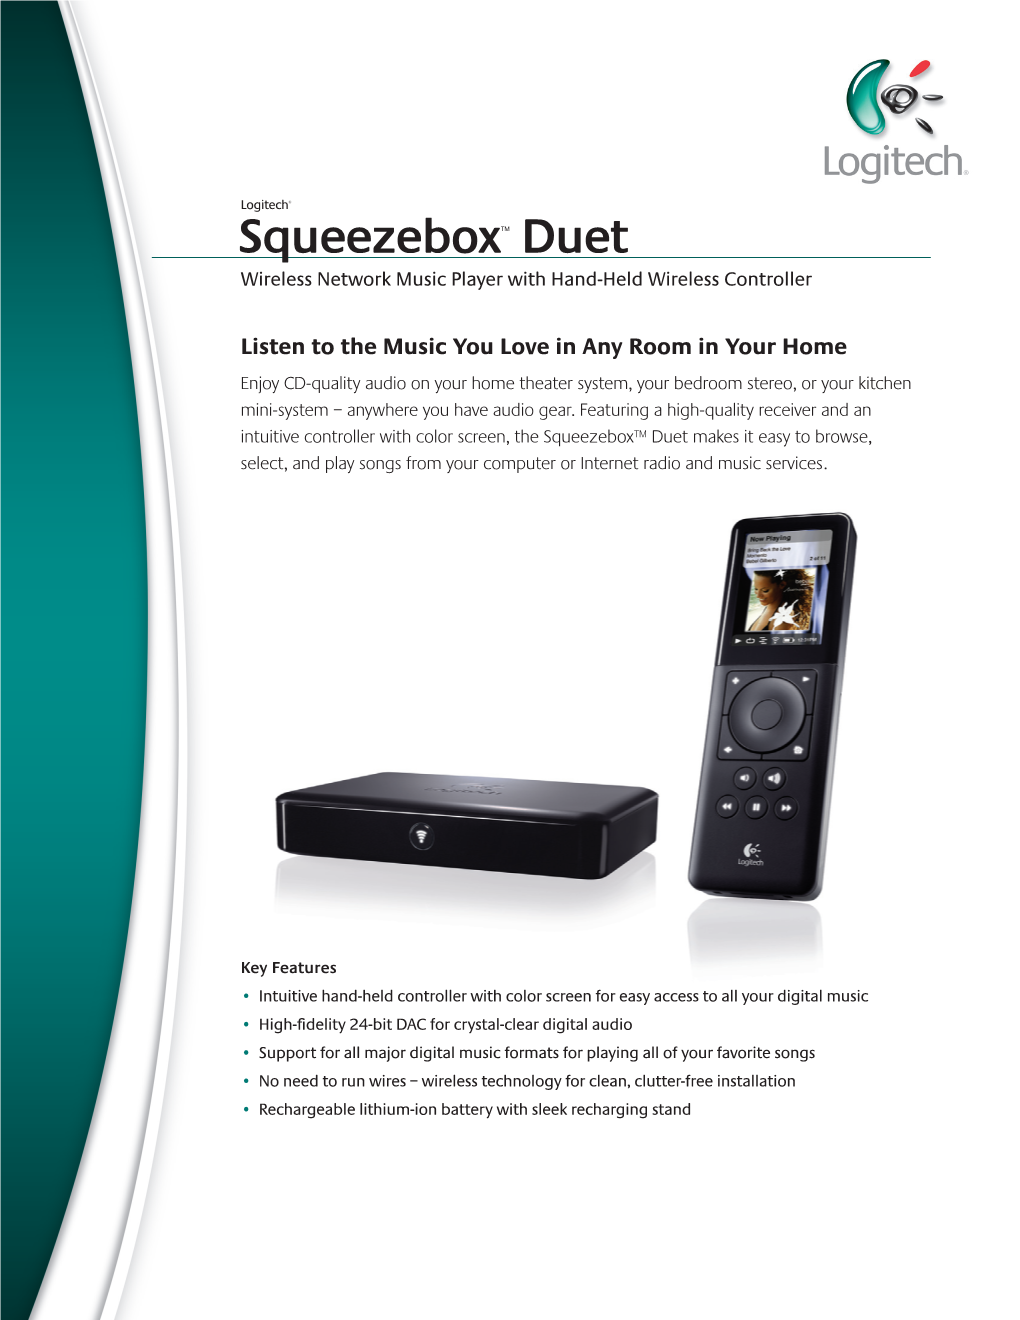 Squeezebox™ Duet Wireless Network Music Player with Hand-Held Wireless Controller